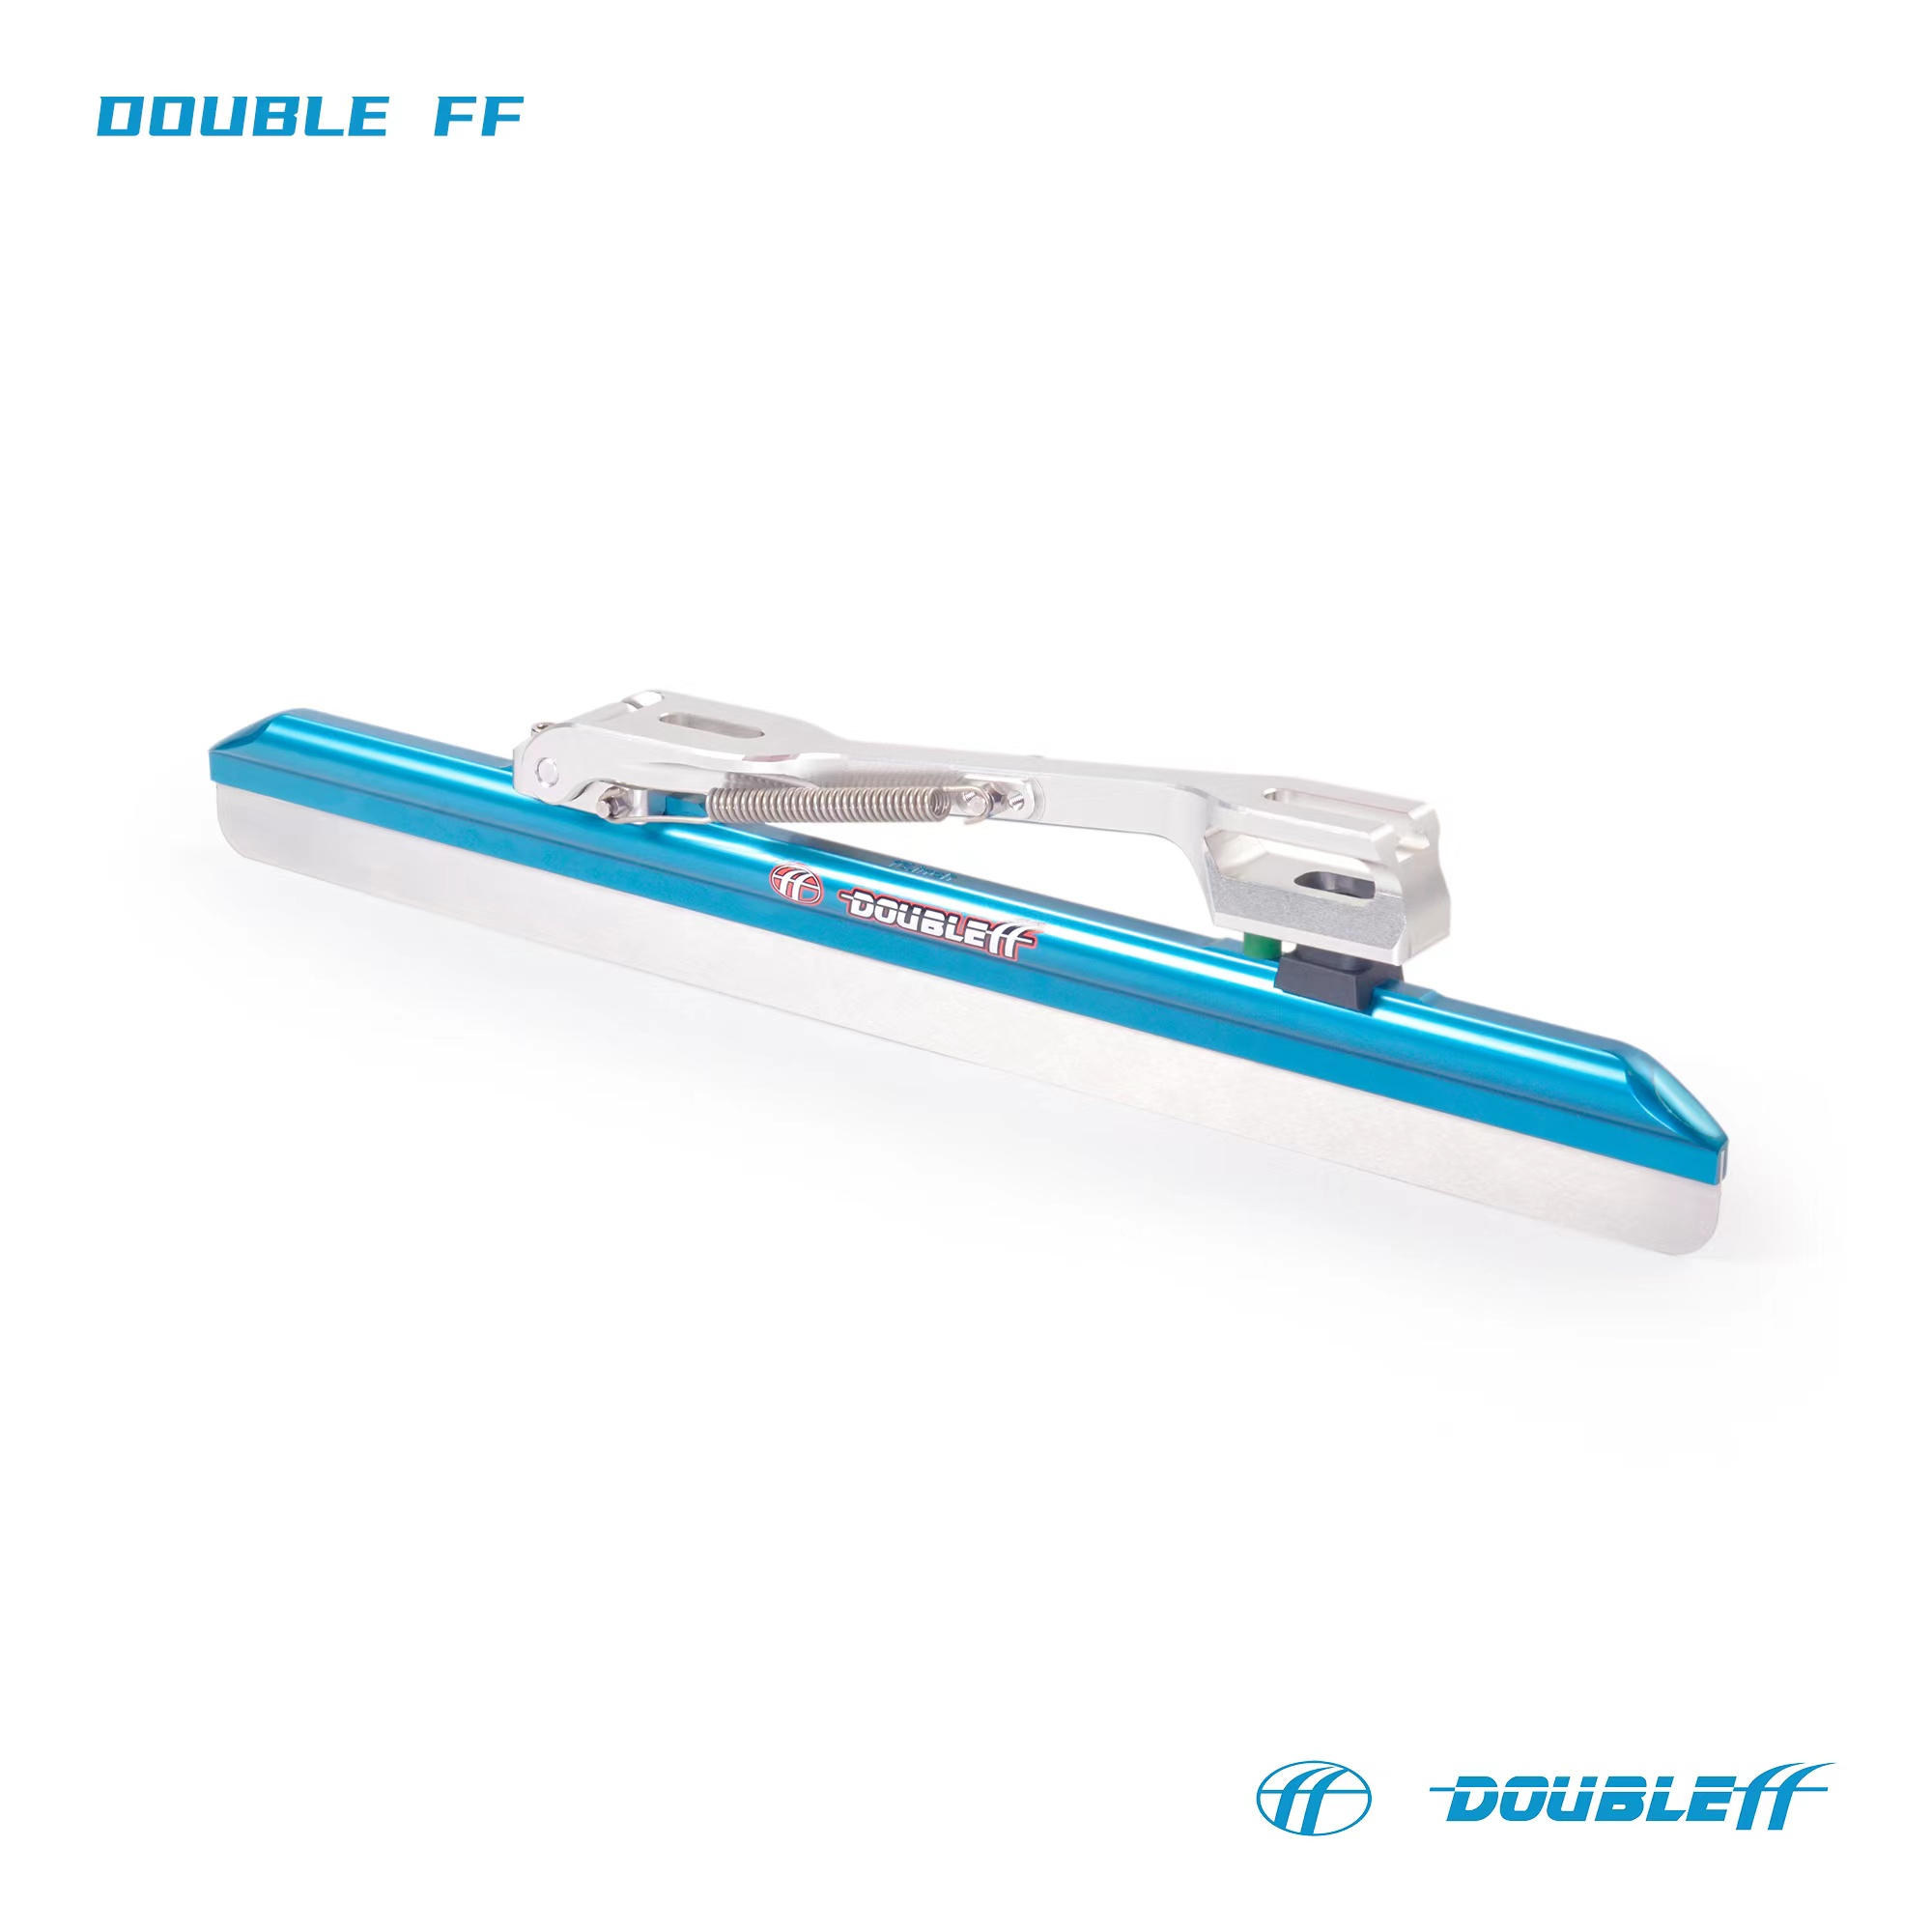 Double FF 64 HRC Long Track Ice Skate Blades CNC Aluminum 7005 Ice Skate Blades For training or competition